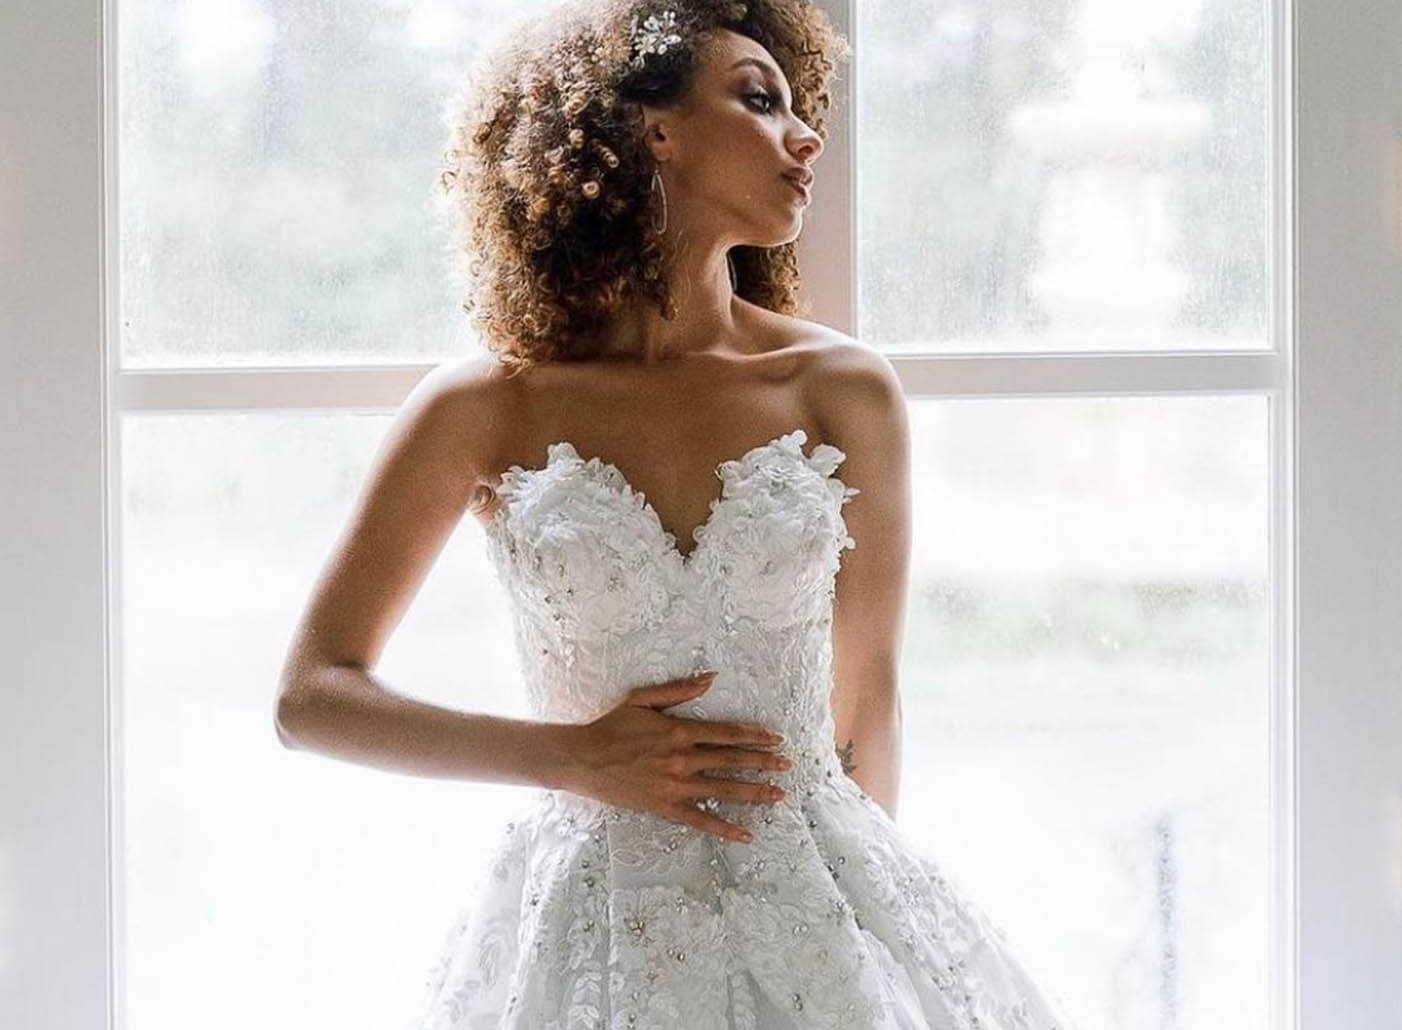 Whitney Houstons Wedding Dress Personal Items to Be Auctioned